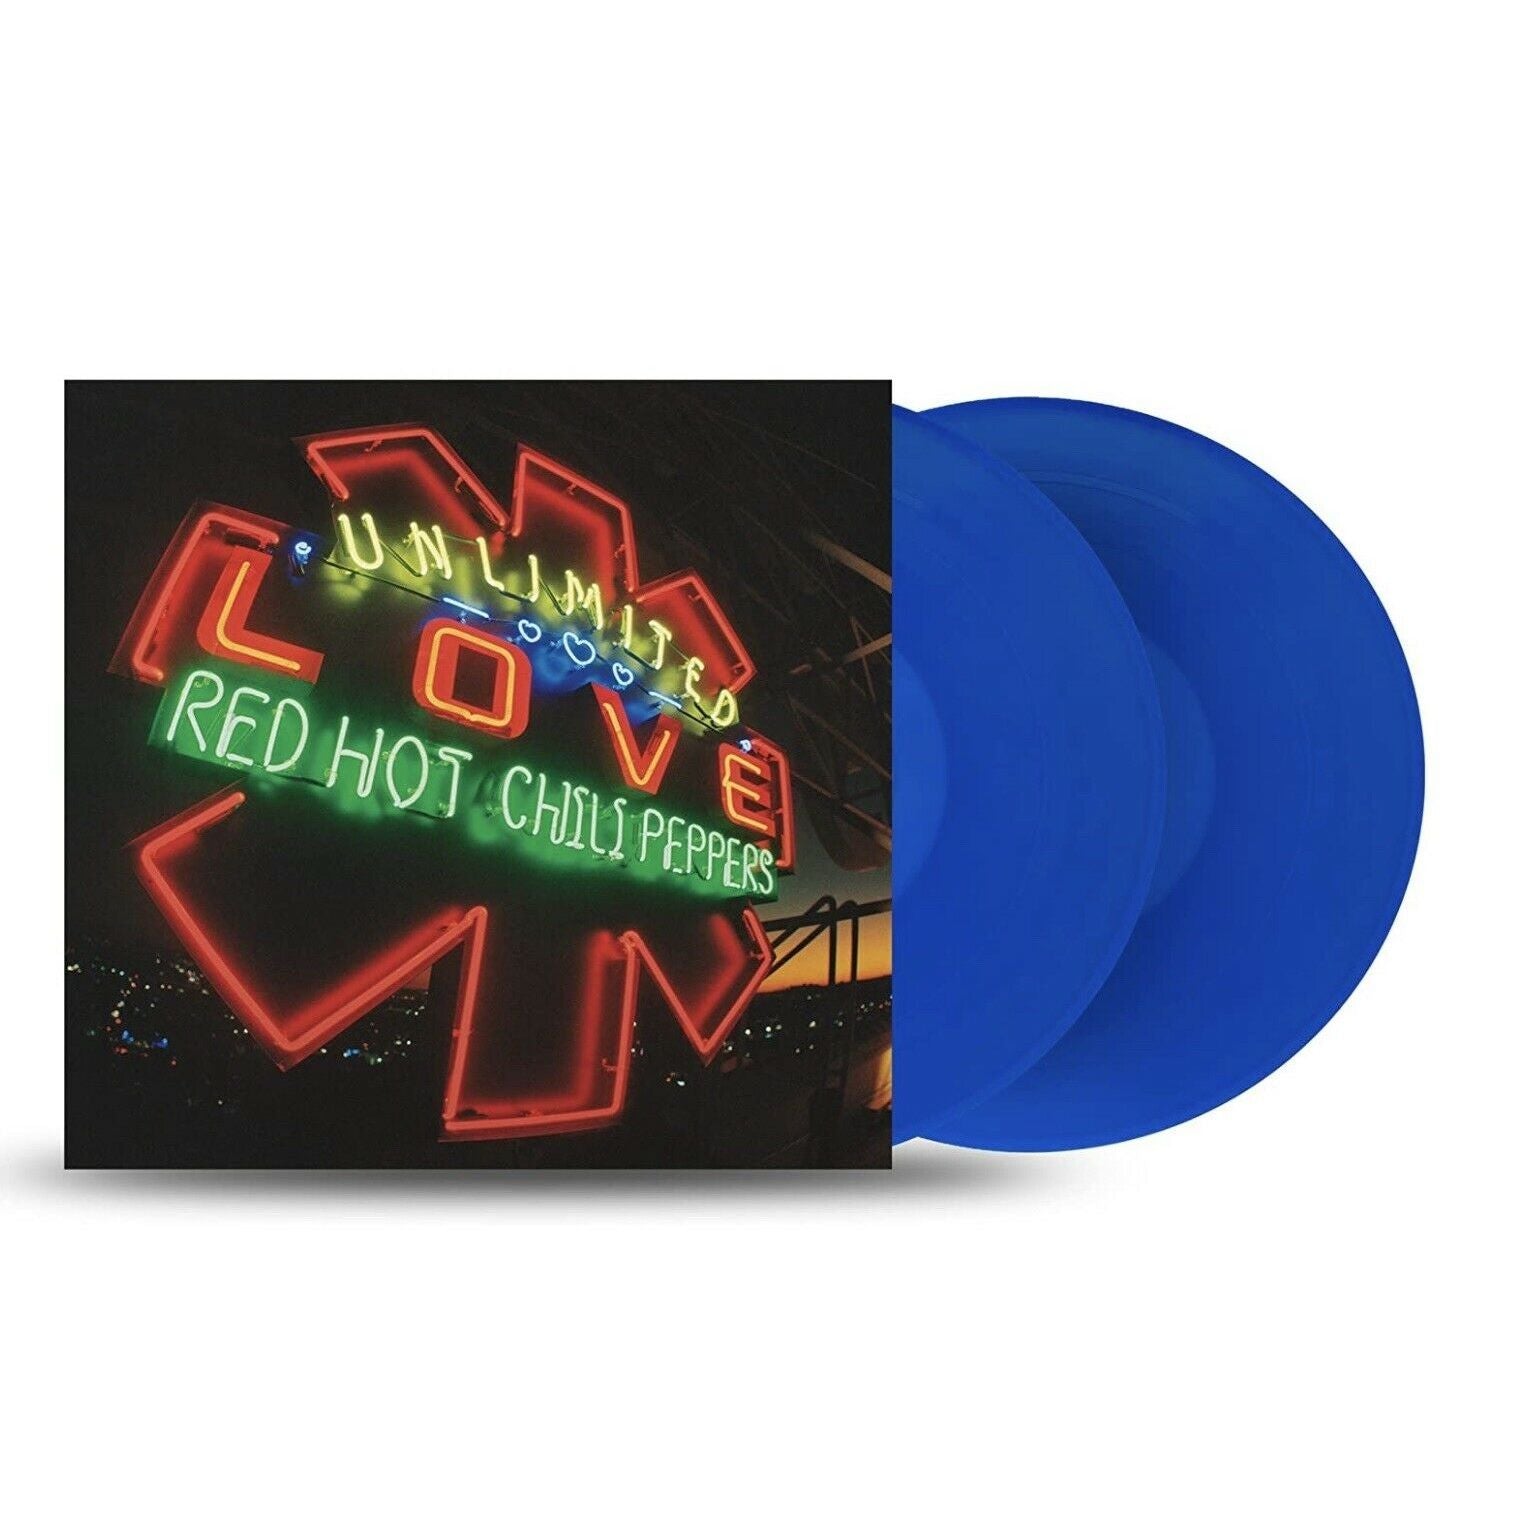 Red Hot Chili Peppers - Unlimited Love (Ltd. Ed. 2LP Indie Exclusive Blue vinyl) - Vinyl - New